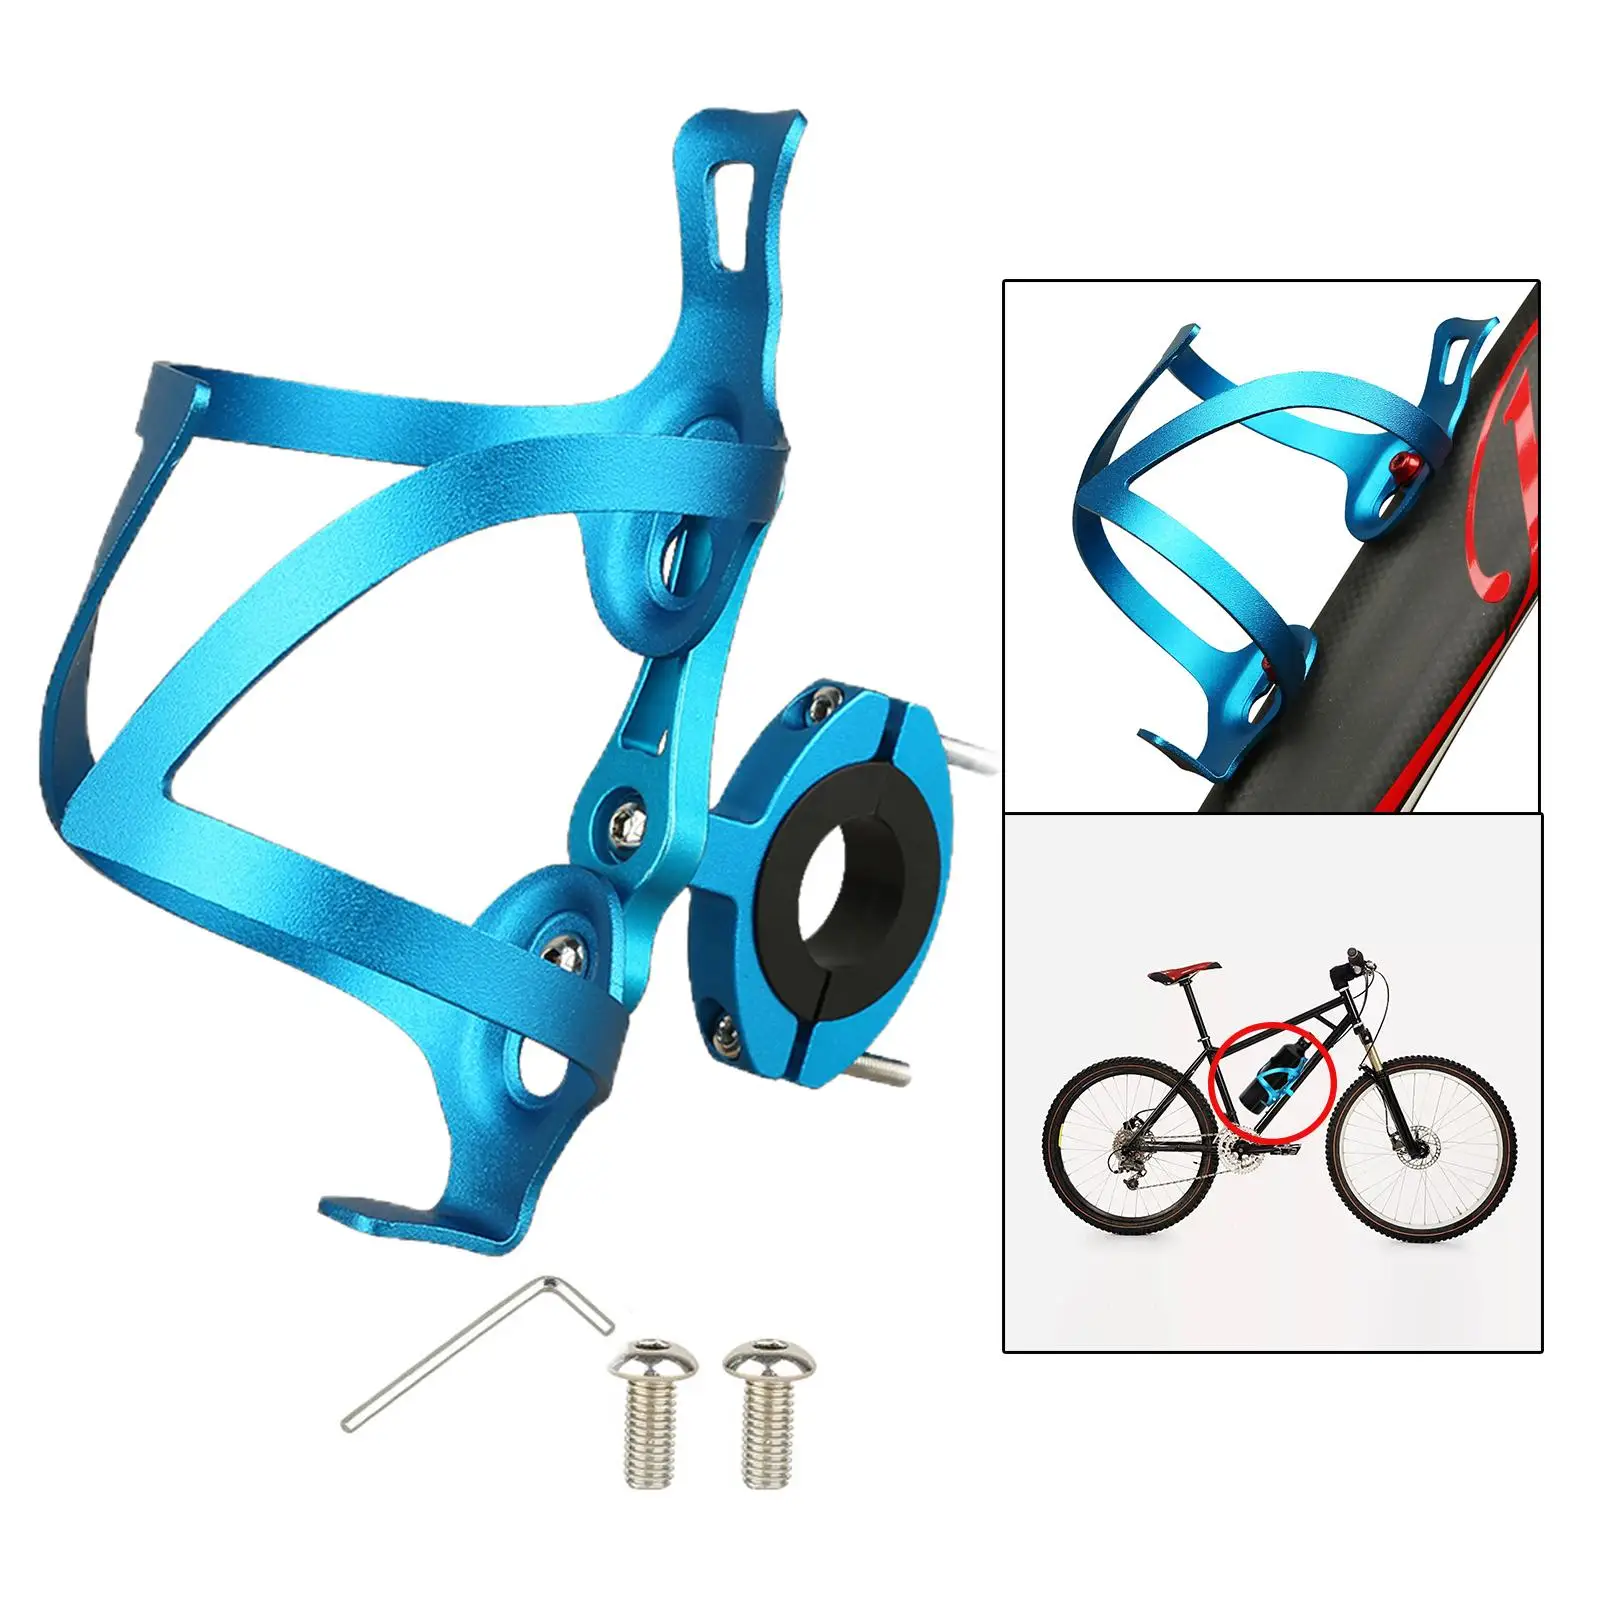 Aluminu Alloy Water Drink Bottle Handlebar Bracket for Bicycle Road